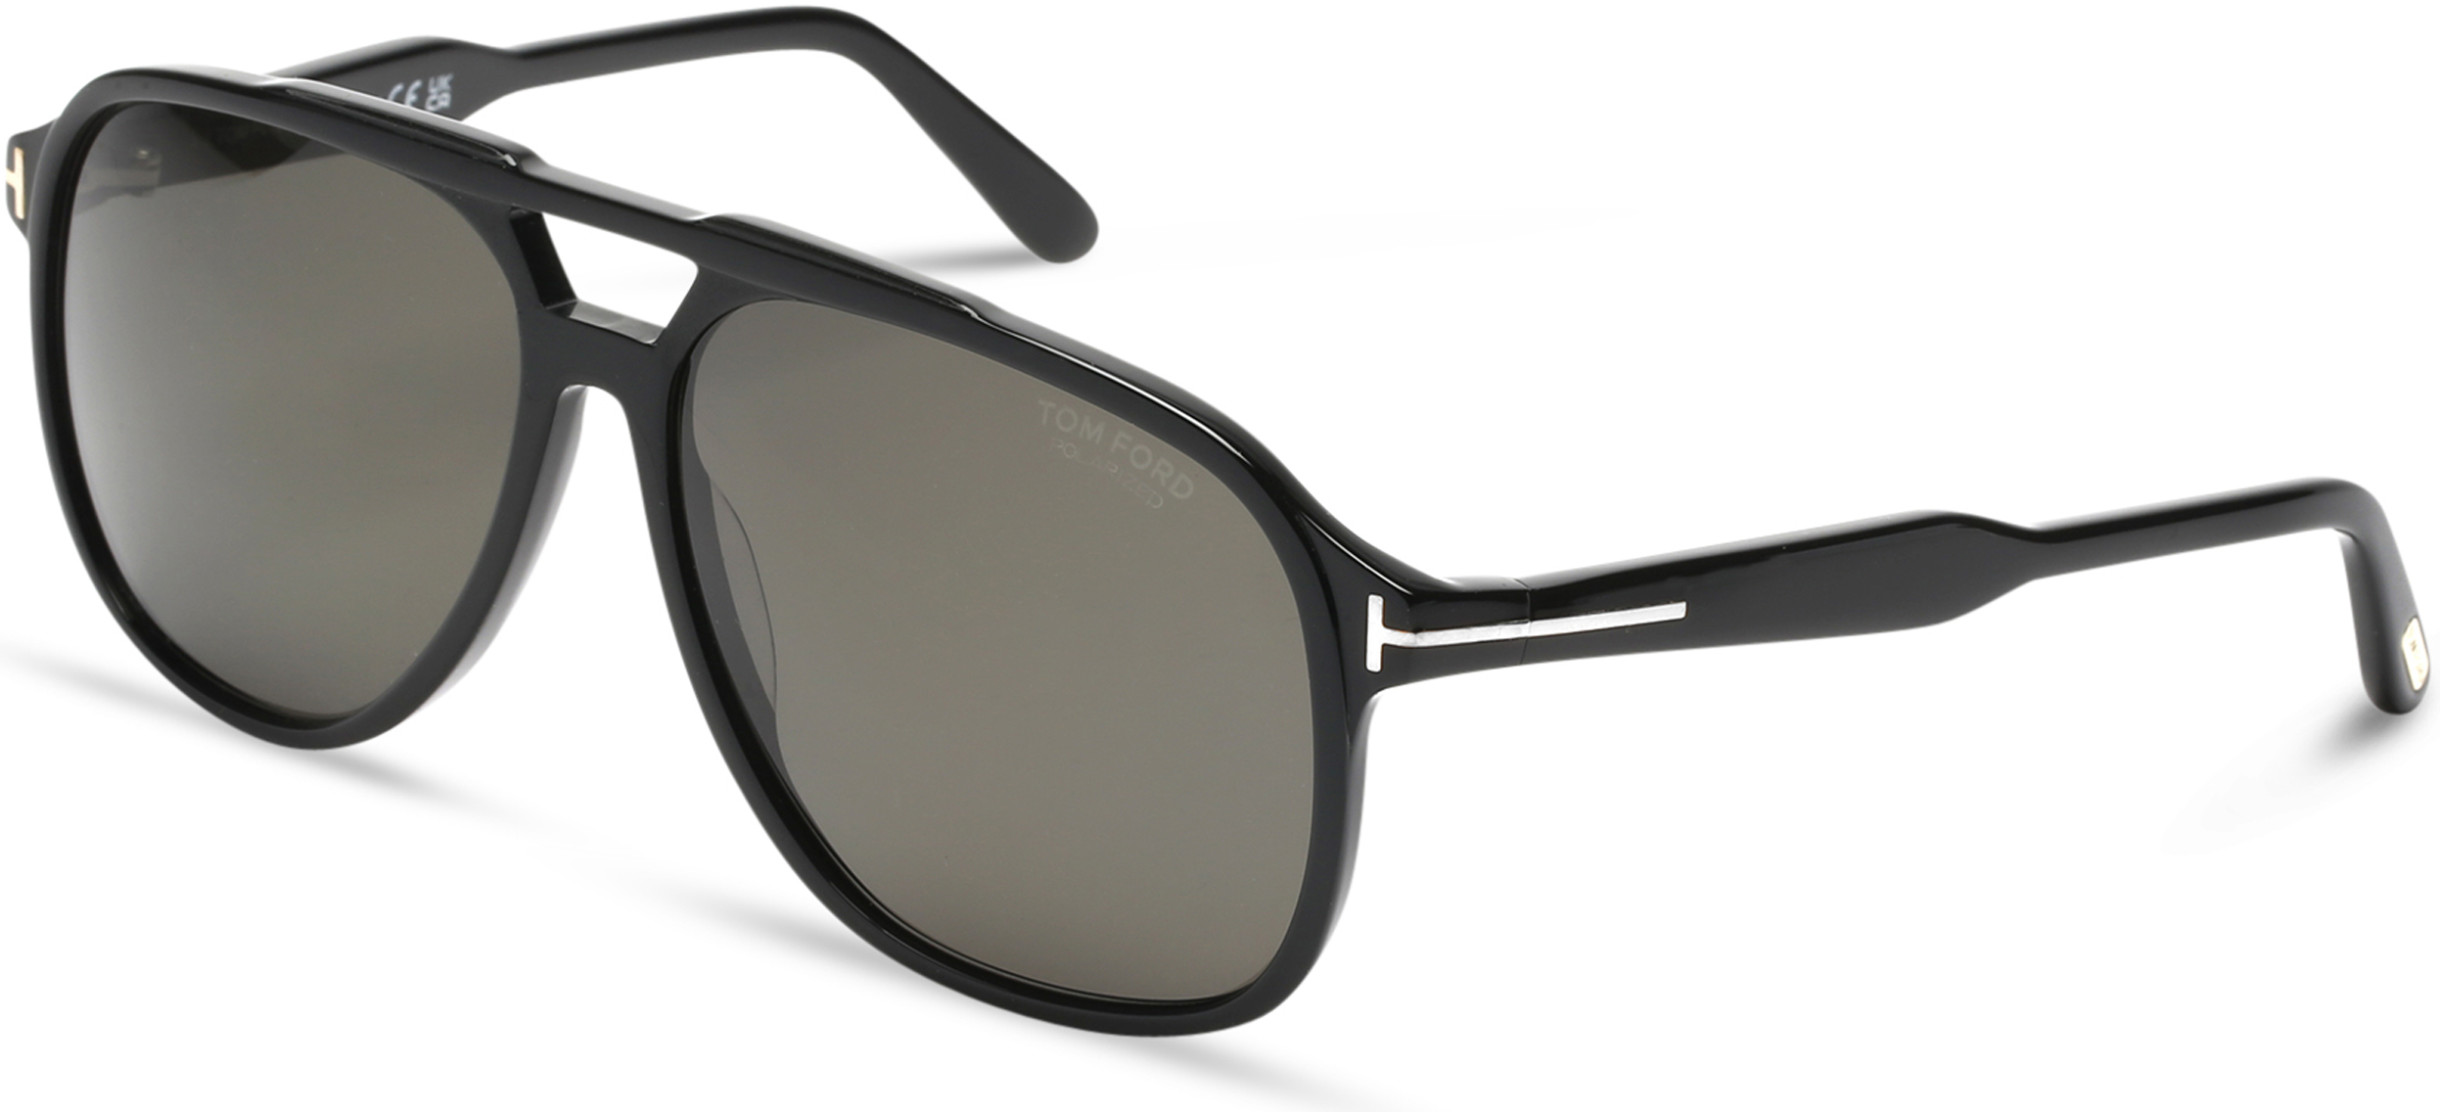 Tom Ford Ft0753 Raoul - Cunningham Optical One